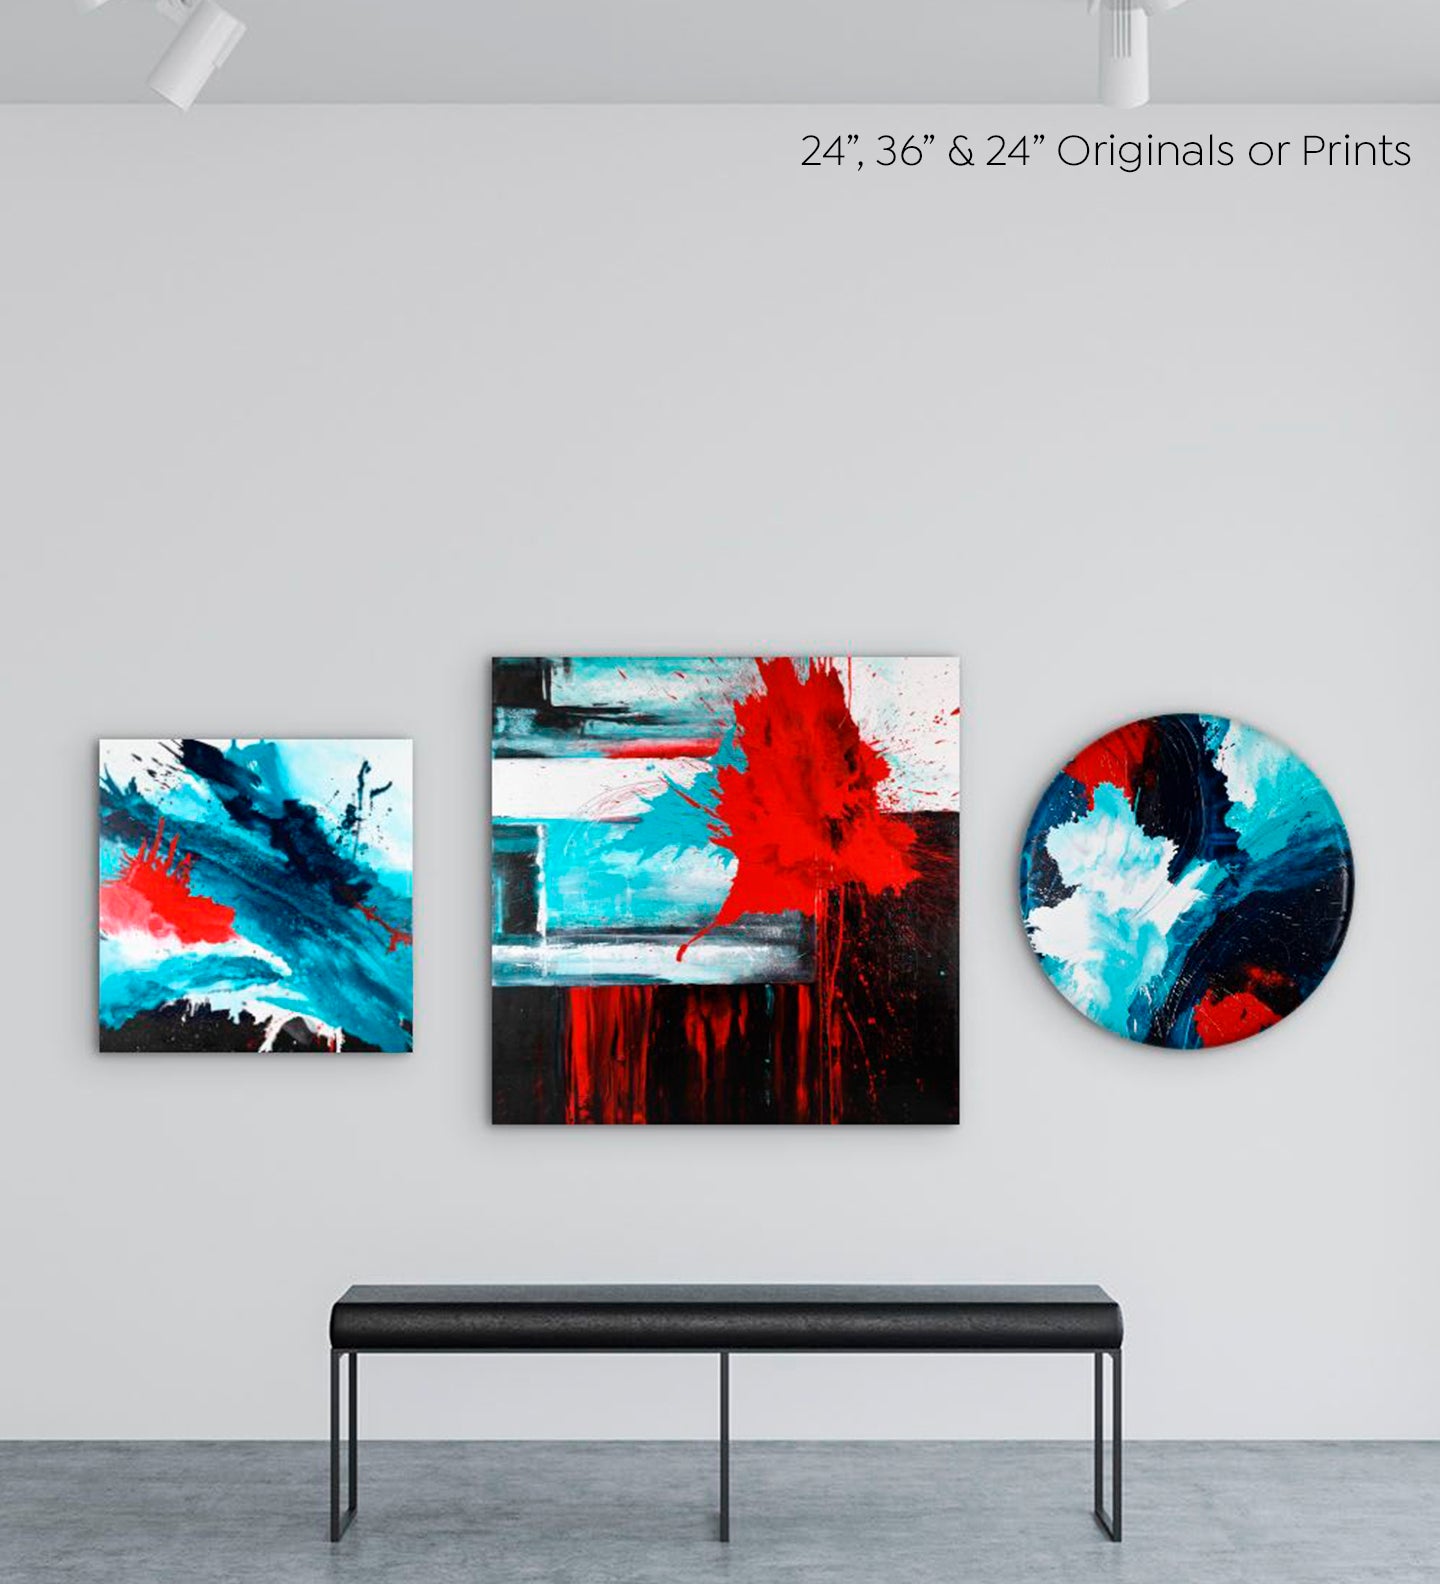 Abstract Expressionism acrylic 36” print or original: black, red, bright white and turquoise blue on square Gallery-Wrapped canvas on white wall with two 24” paintings from the same series